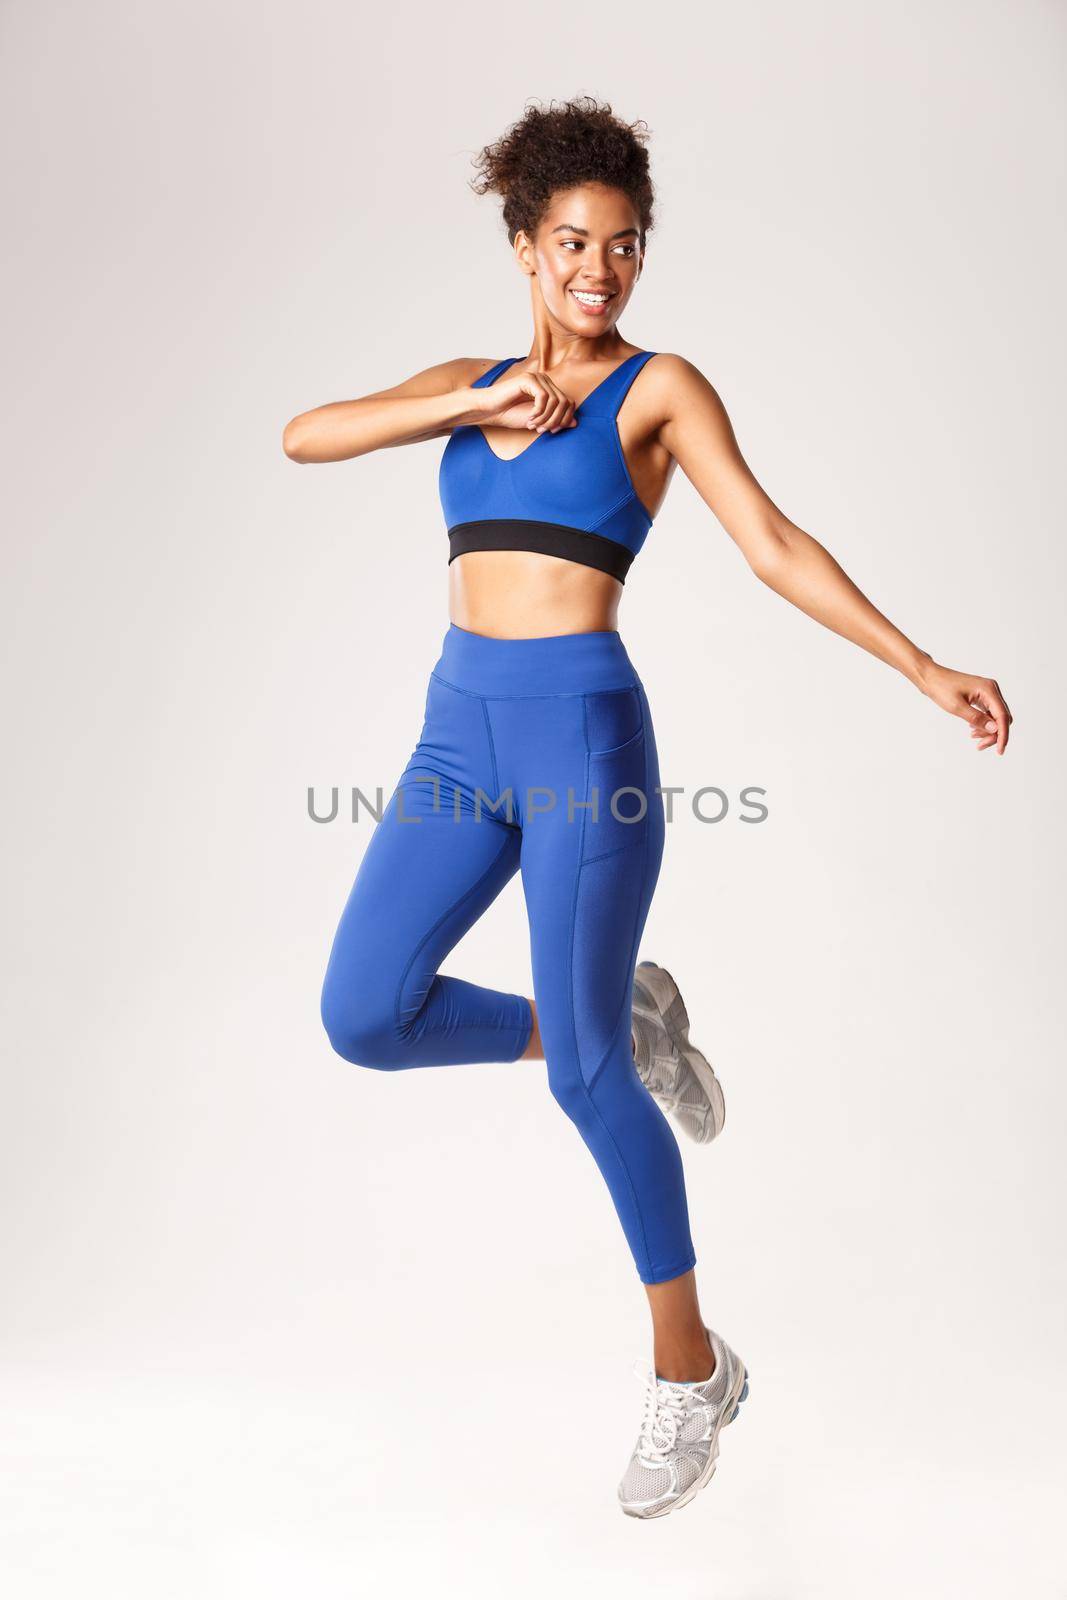 Full length of smiling attractive african-american sportswoman, wearing blue sportswear, jumping and looking away with determined face, worout over white background.